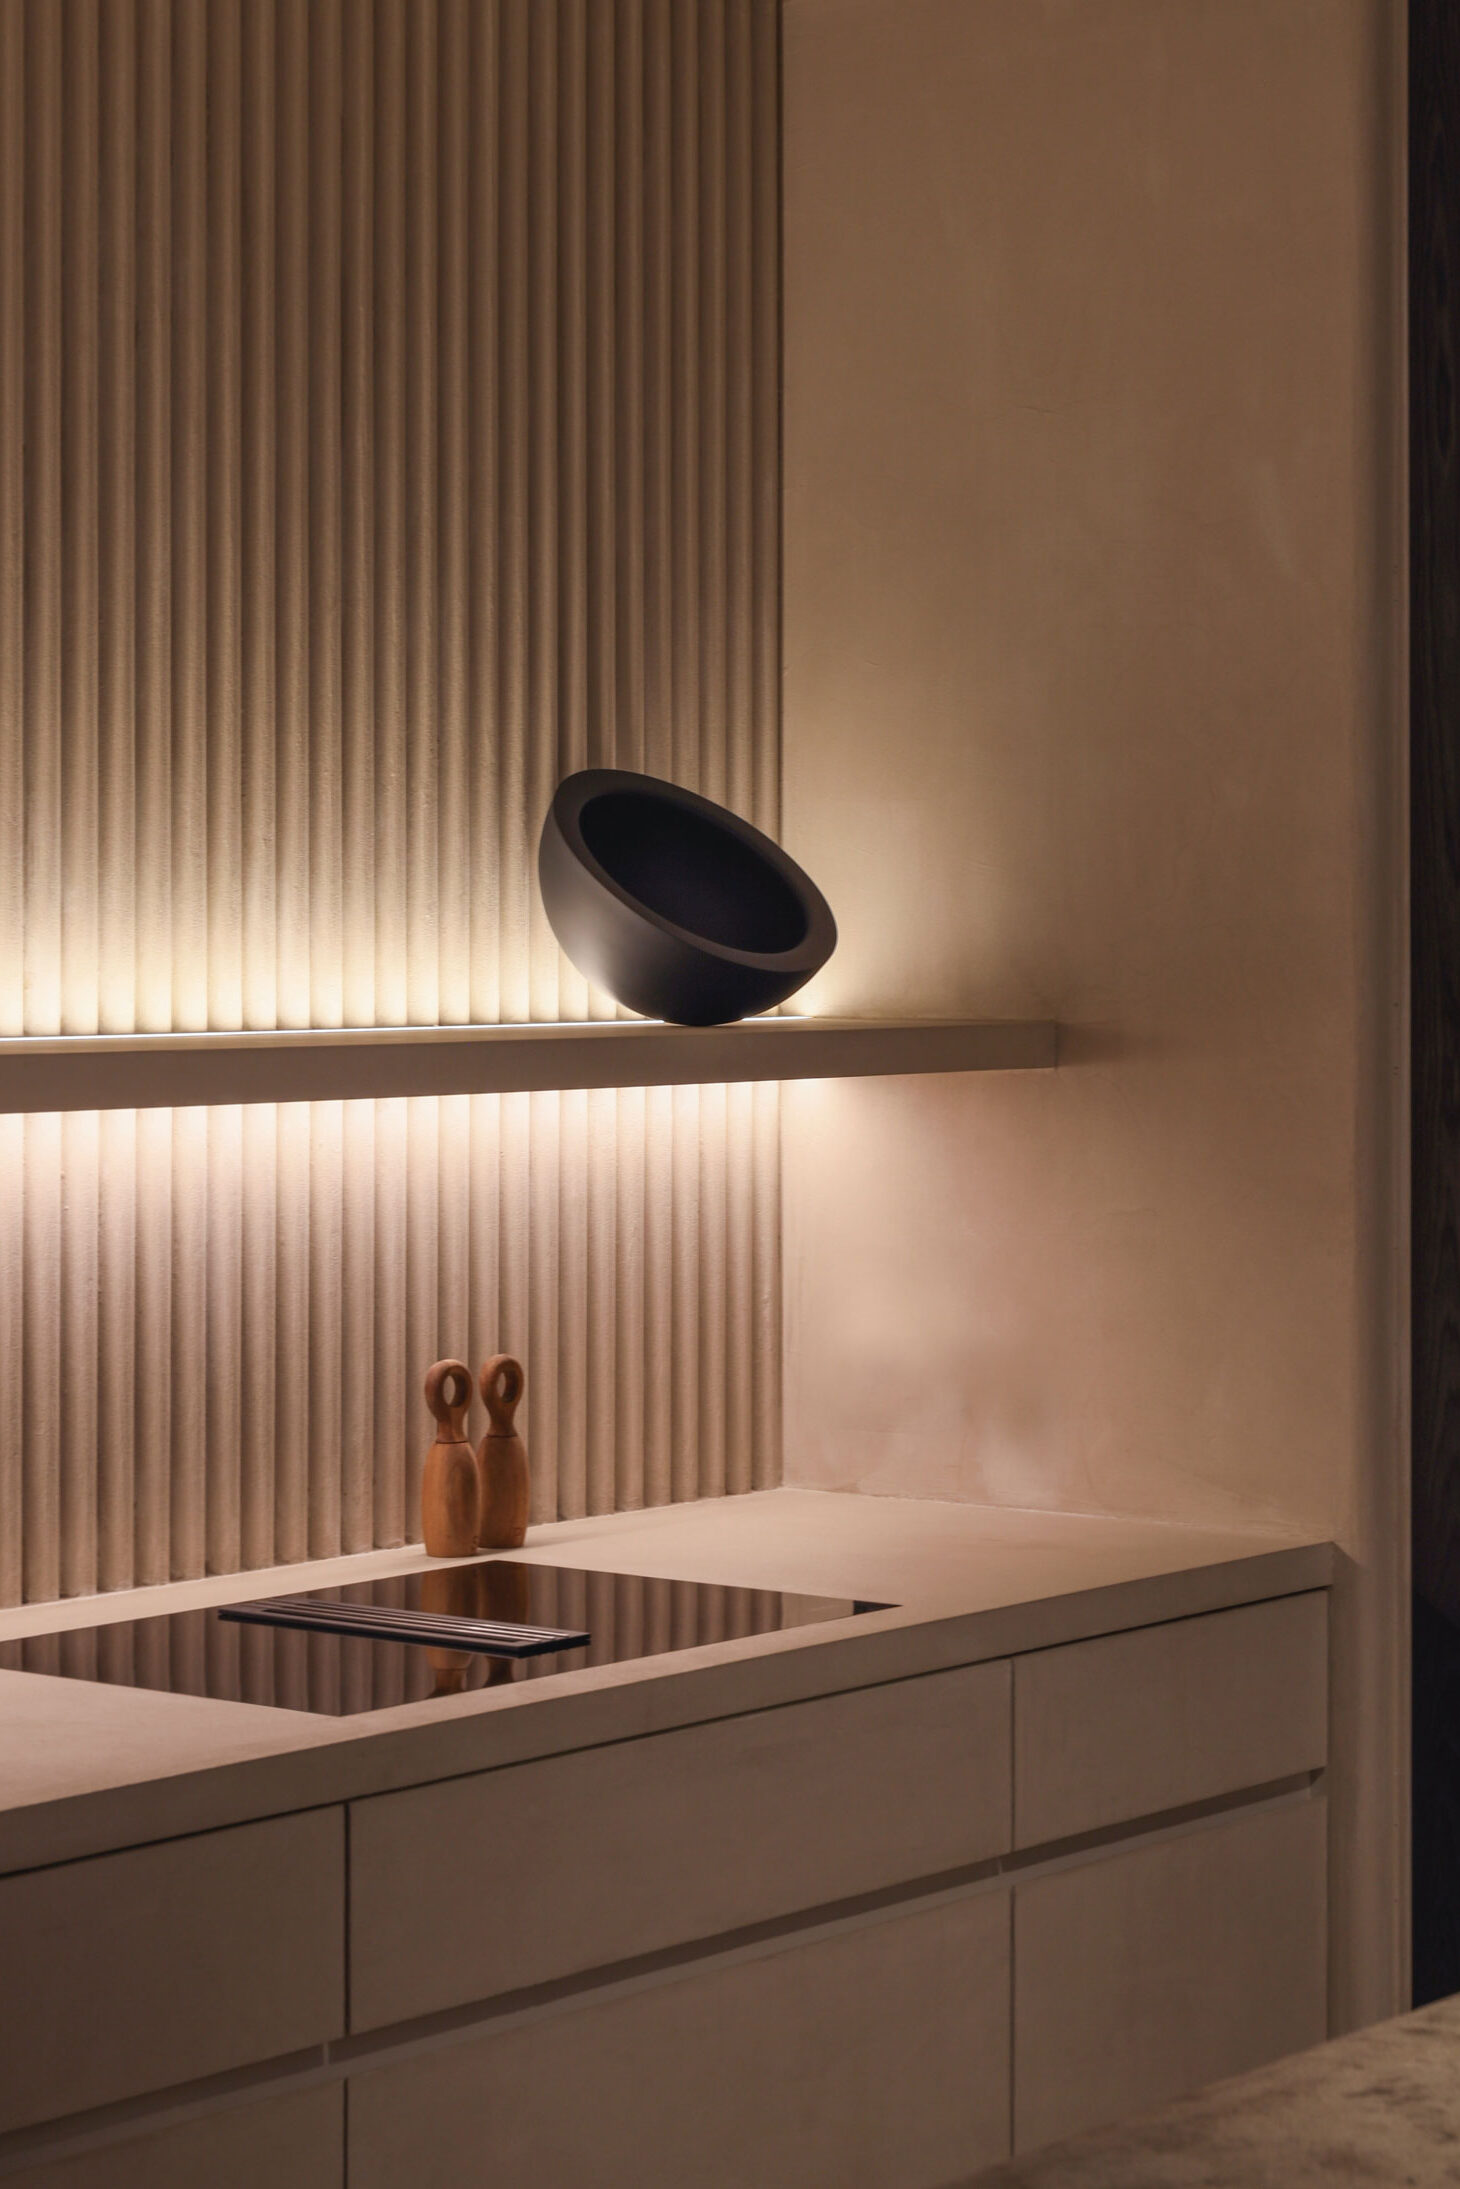 House automation ideas lighting jean philippe delberghe